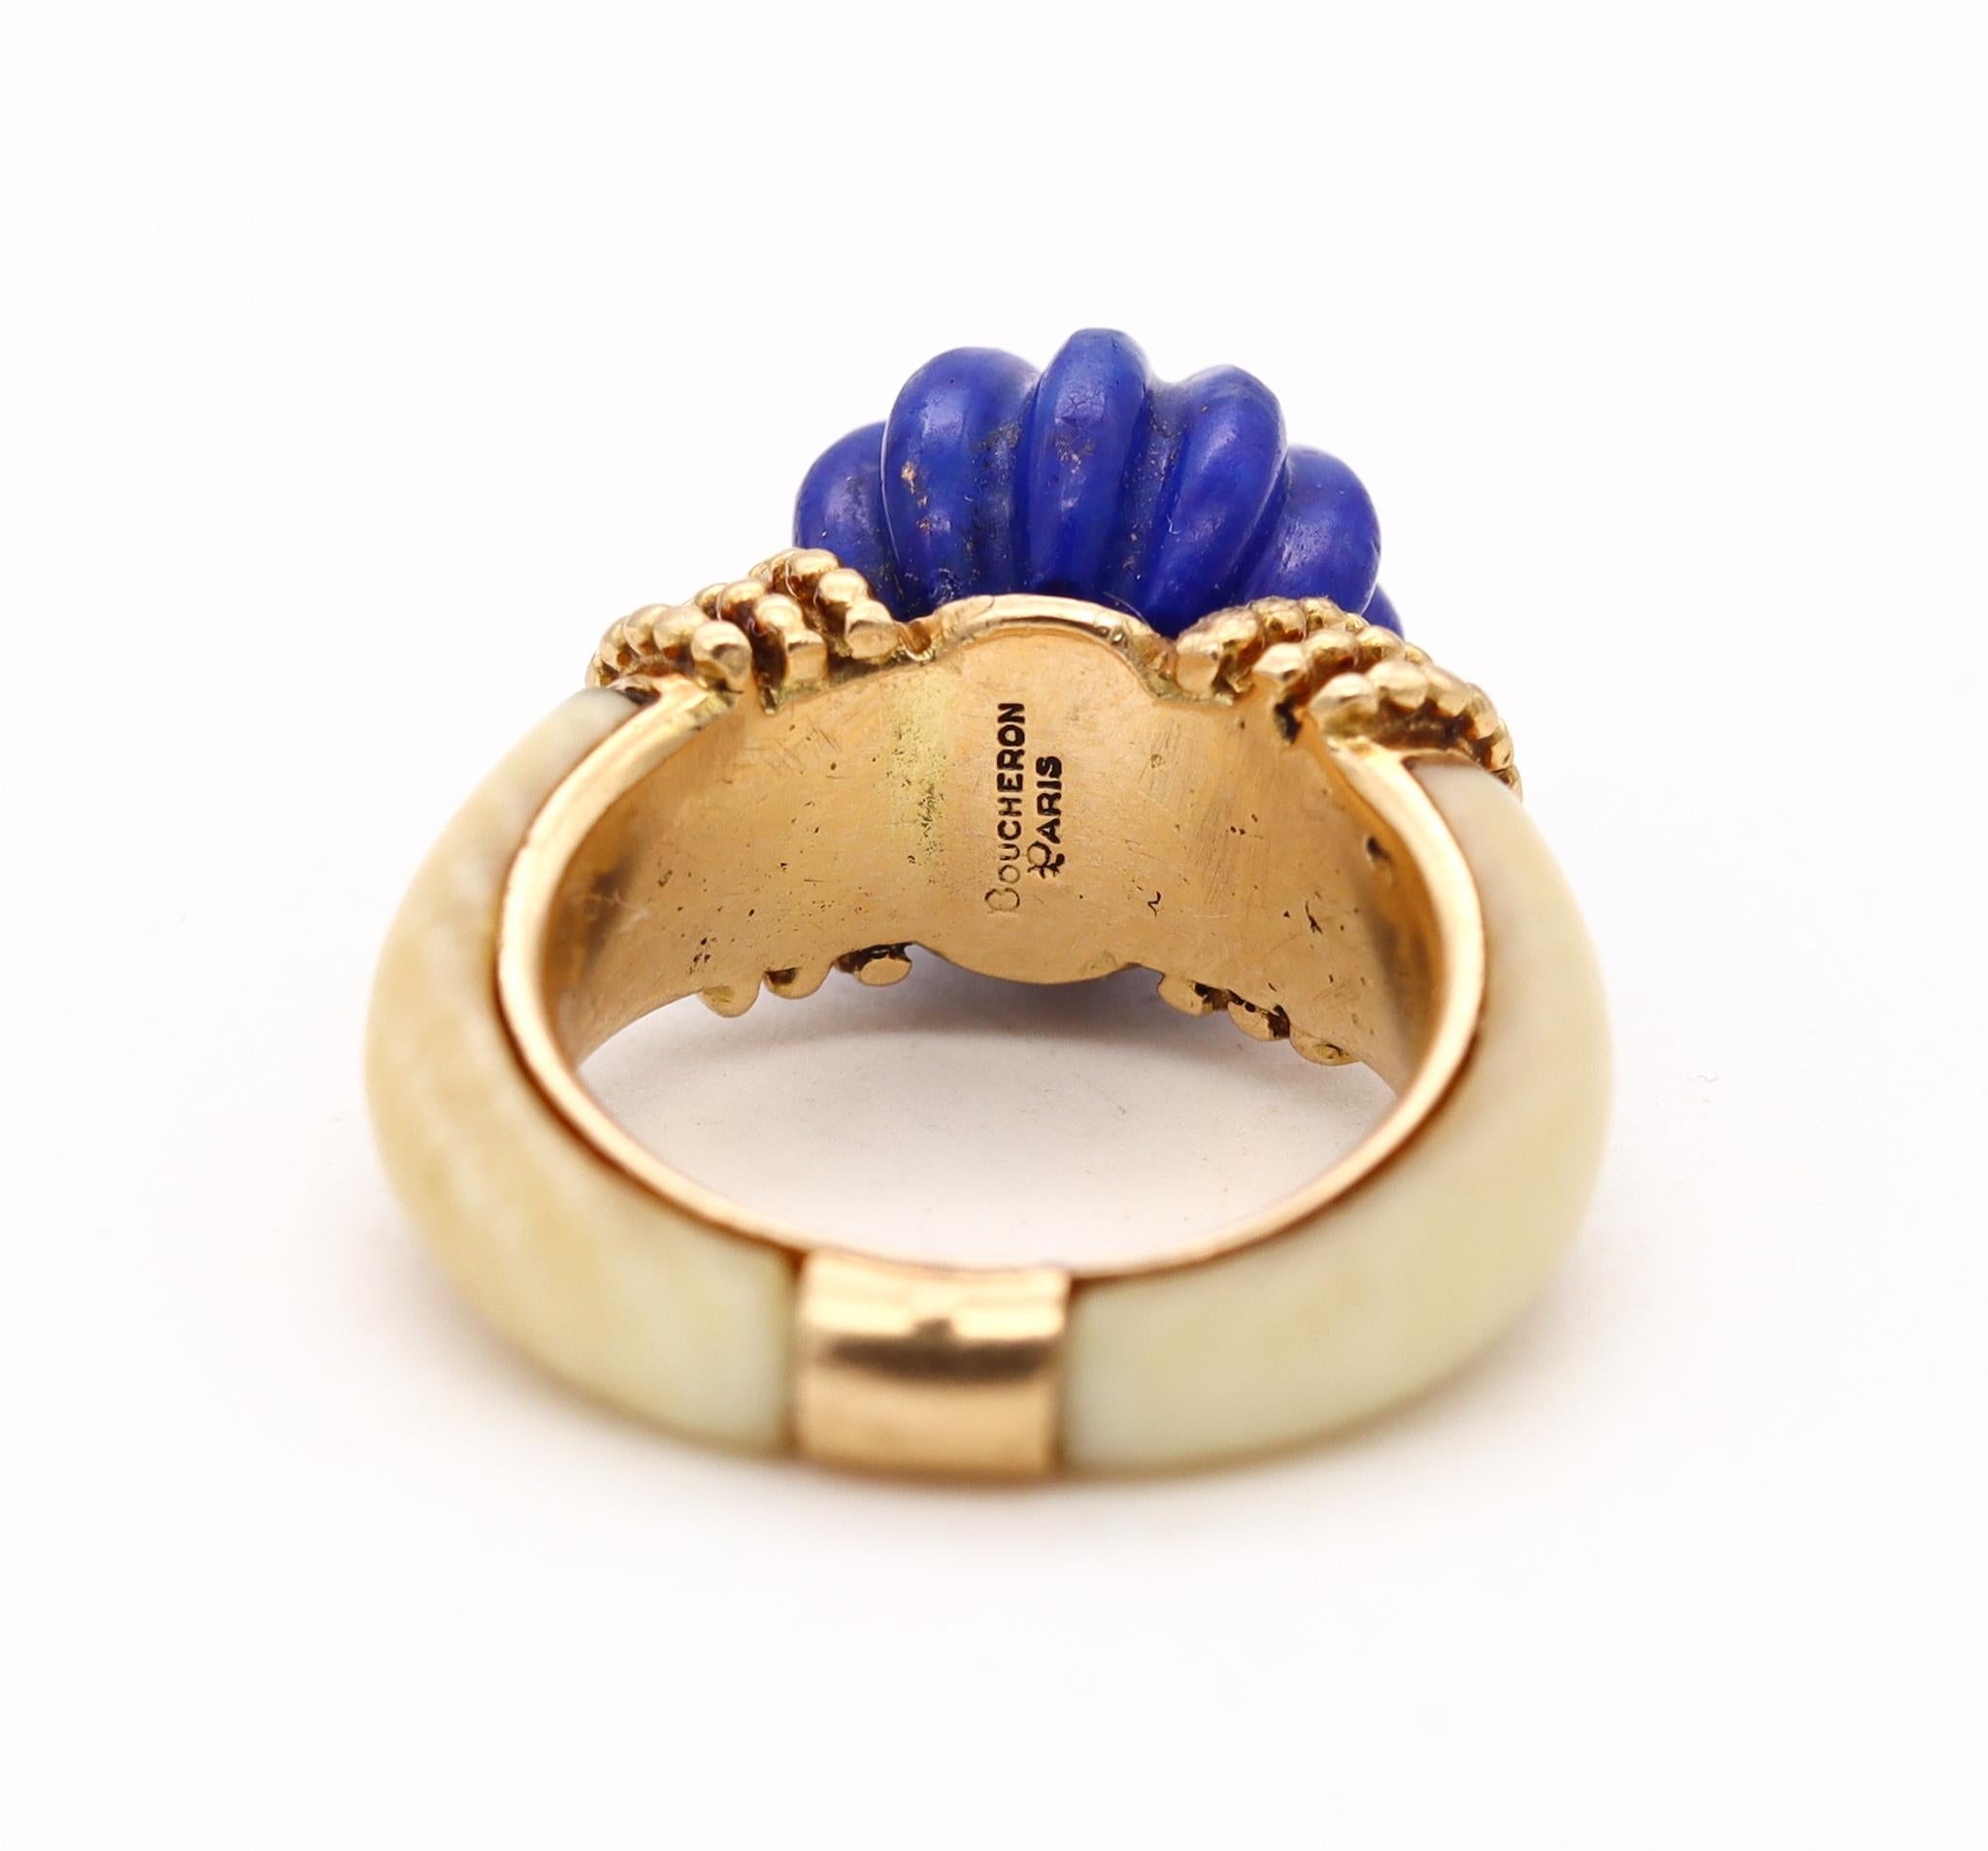 Cabochon Boucheron Paris 1970 Classic Cocktail Ring 18Kt Yellow Gold with Lapis and Coral For Sale